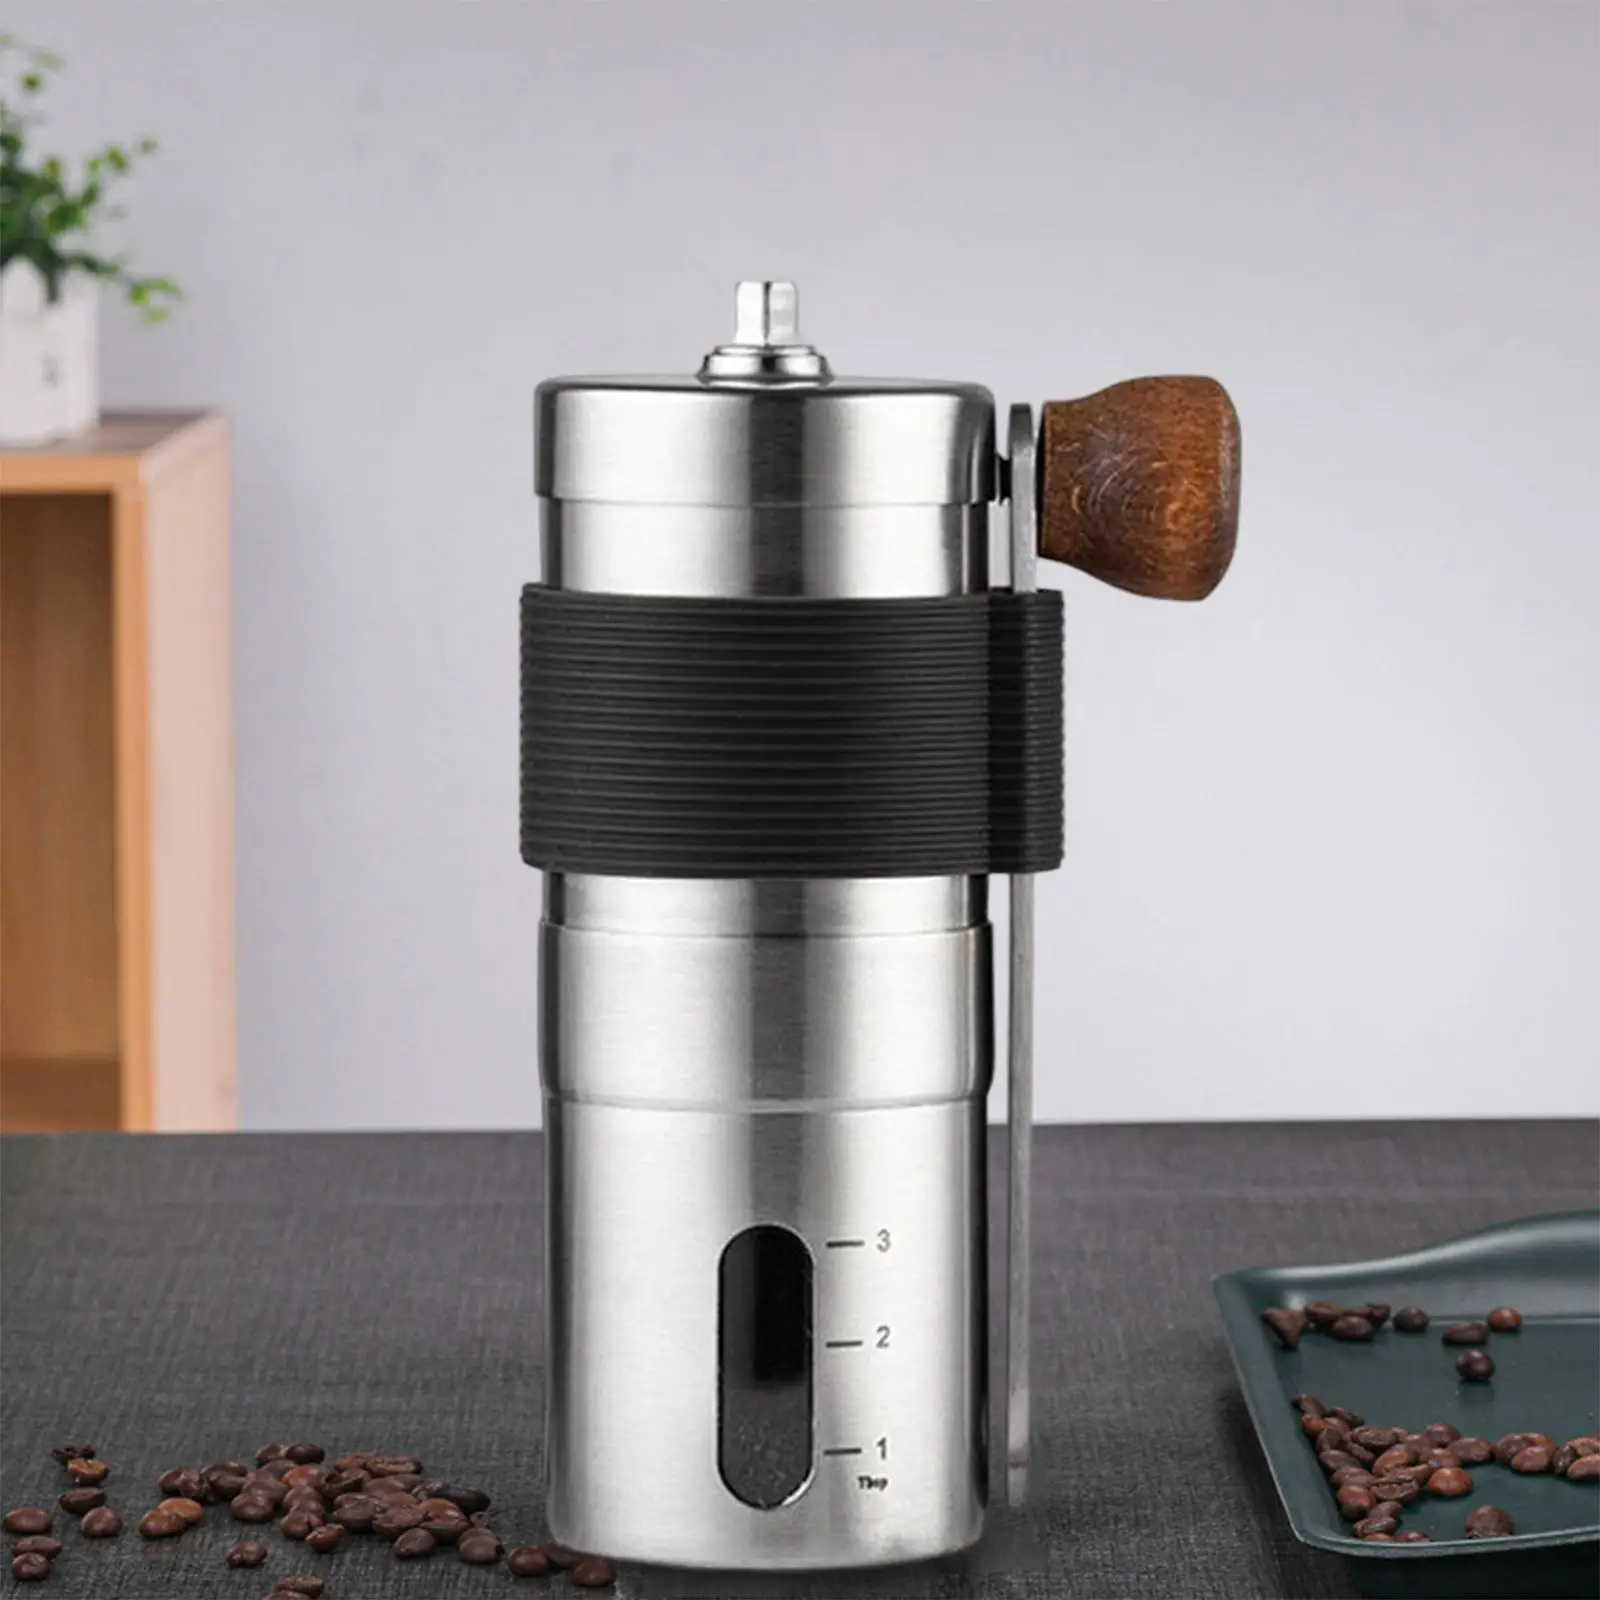 Portable Manual Coffee Grinder Stainless Steel Ceramic Burr Bean Mill